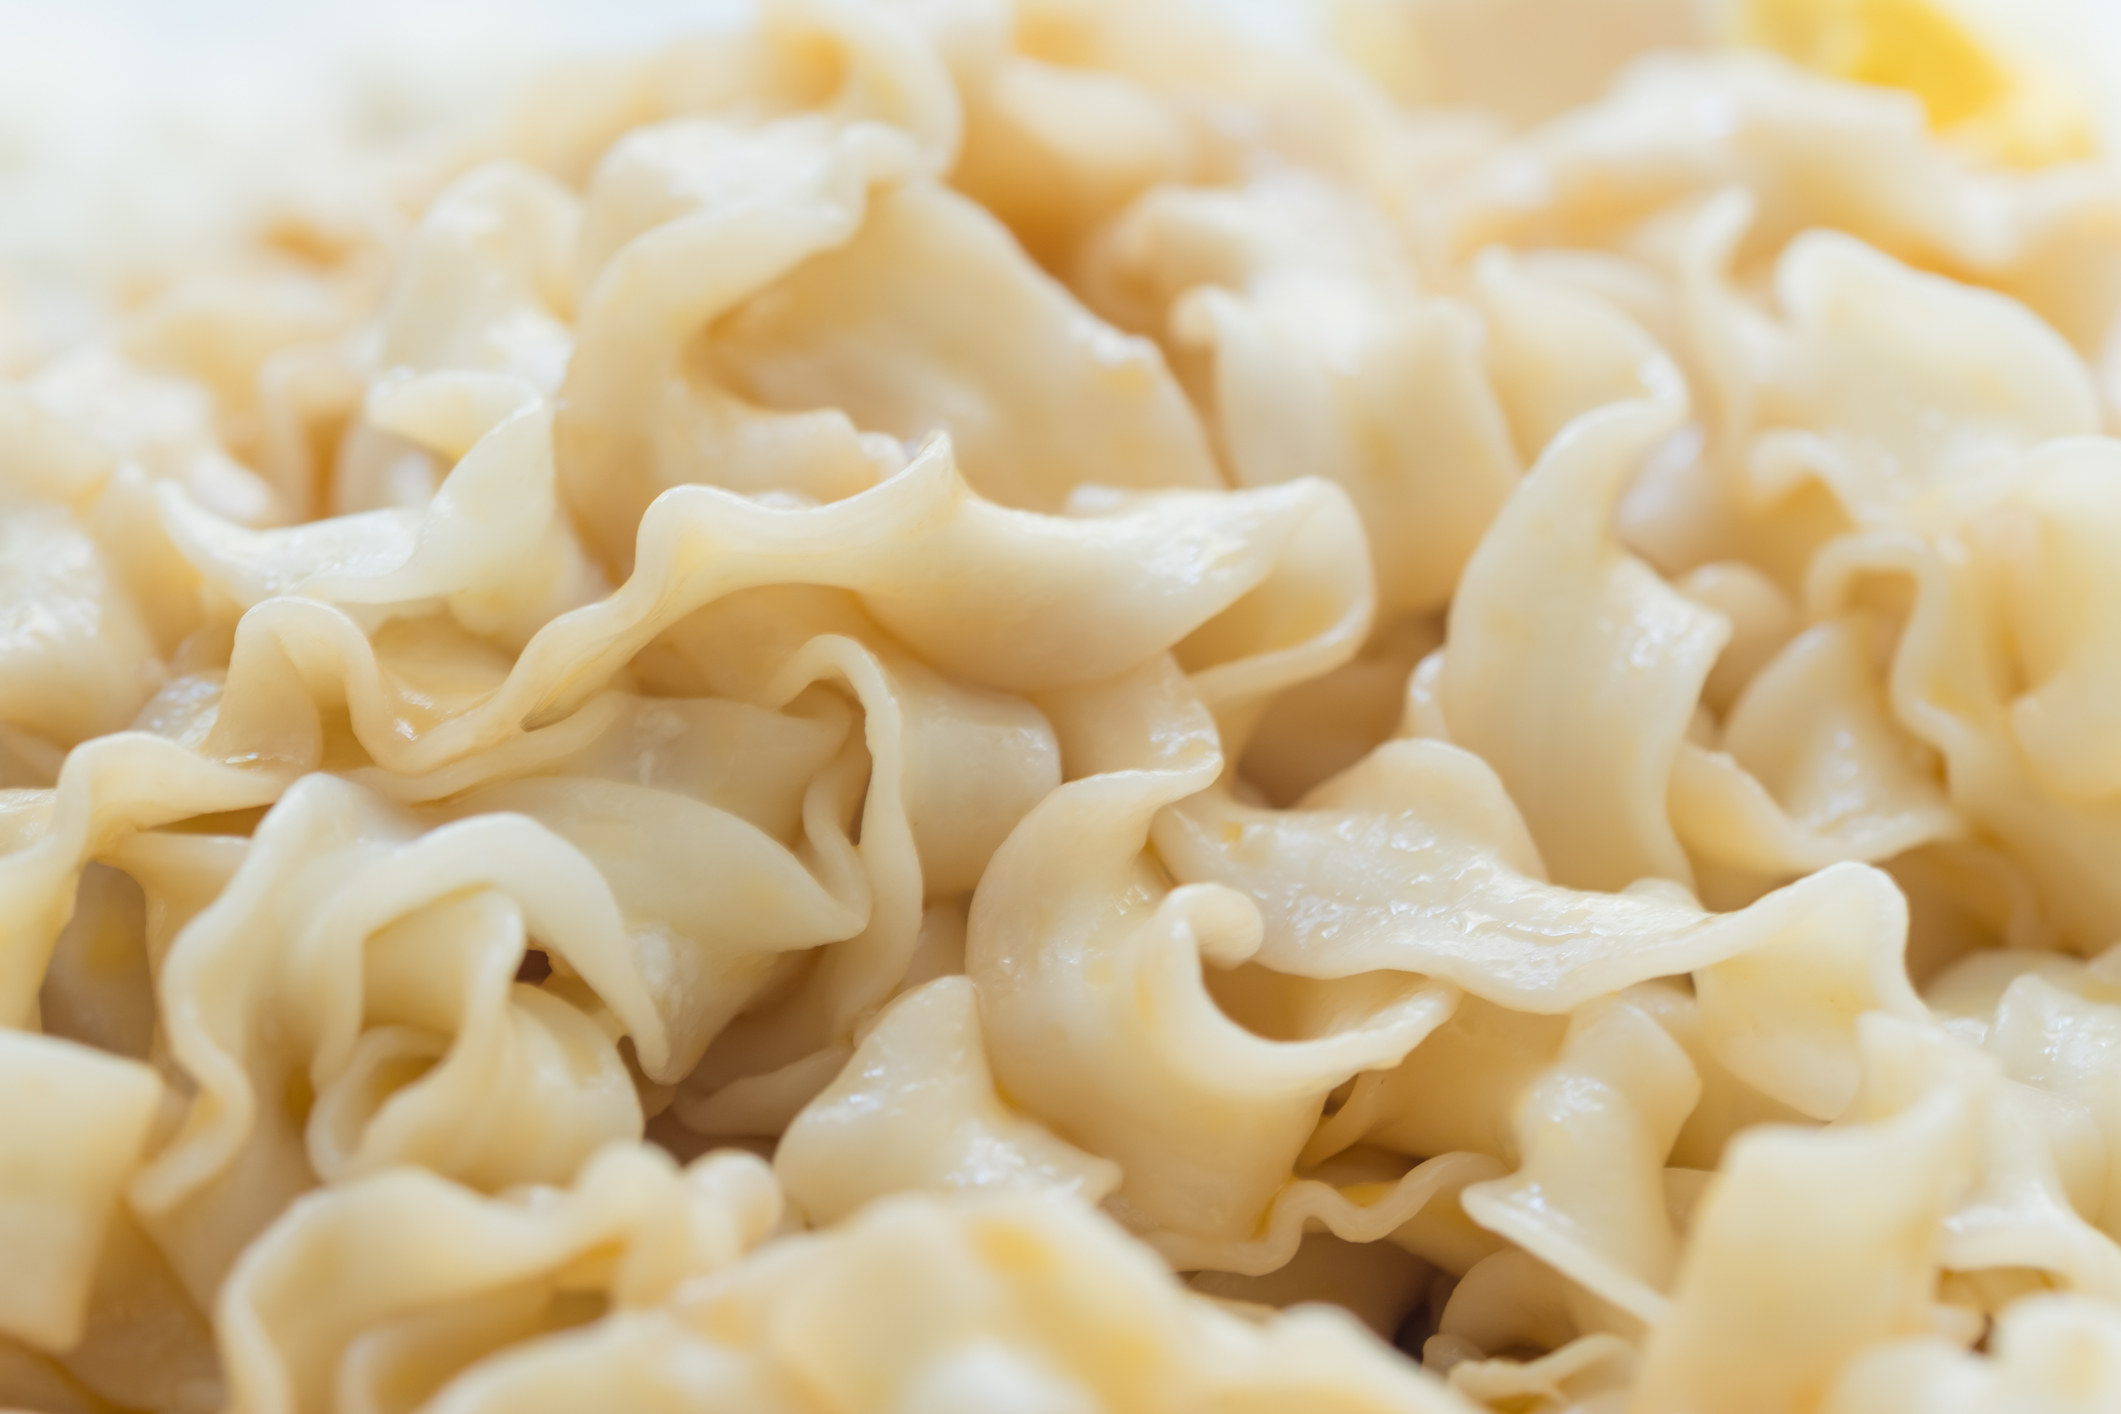 An up-close view of mushy noodles